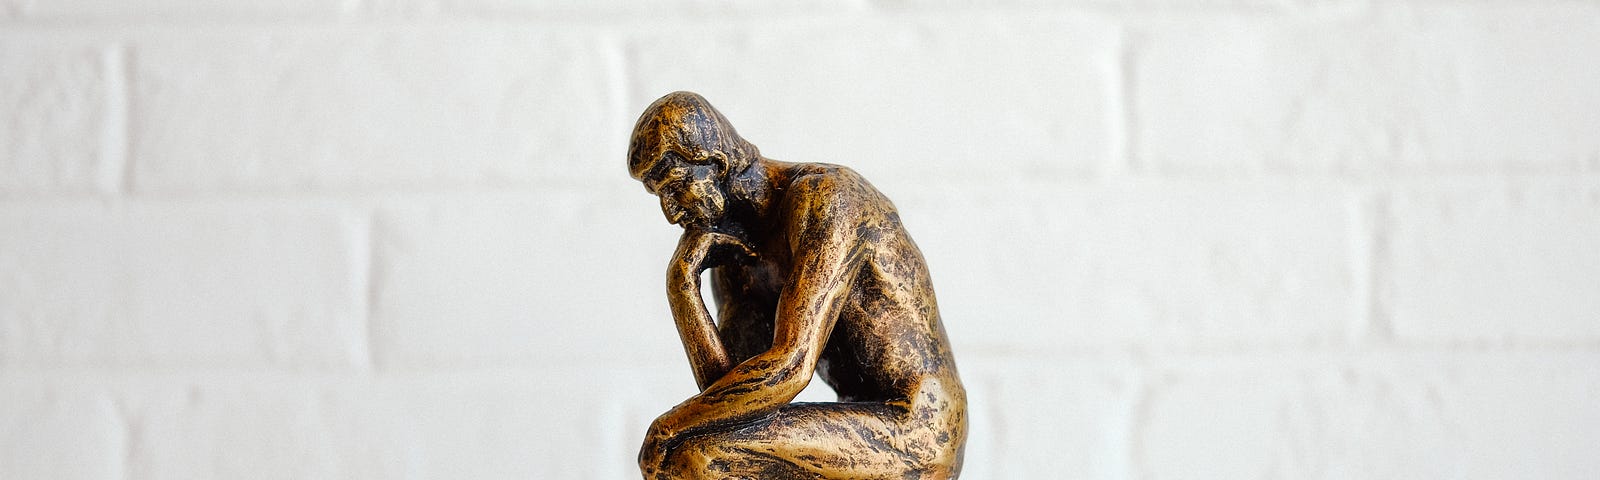 Statue of a man in thinking man pose